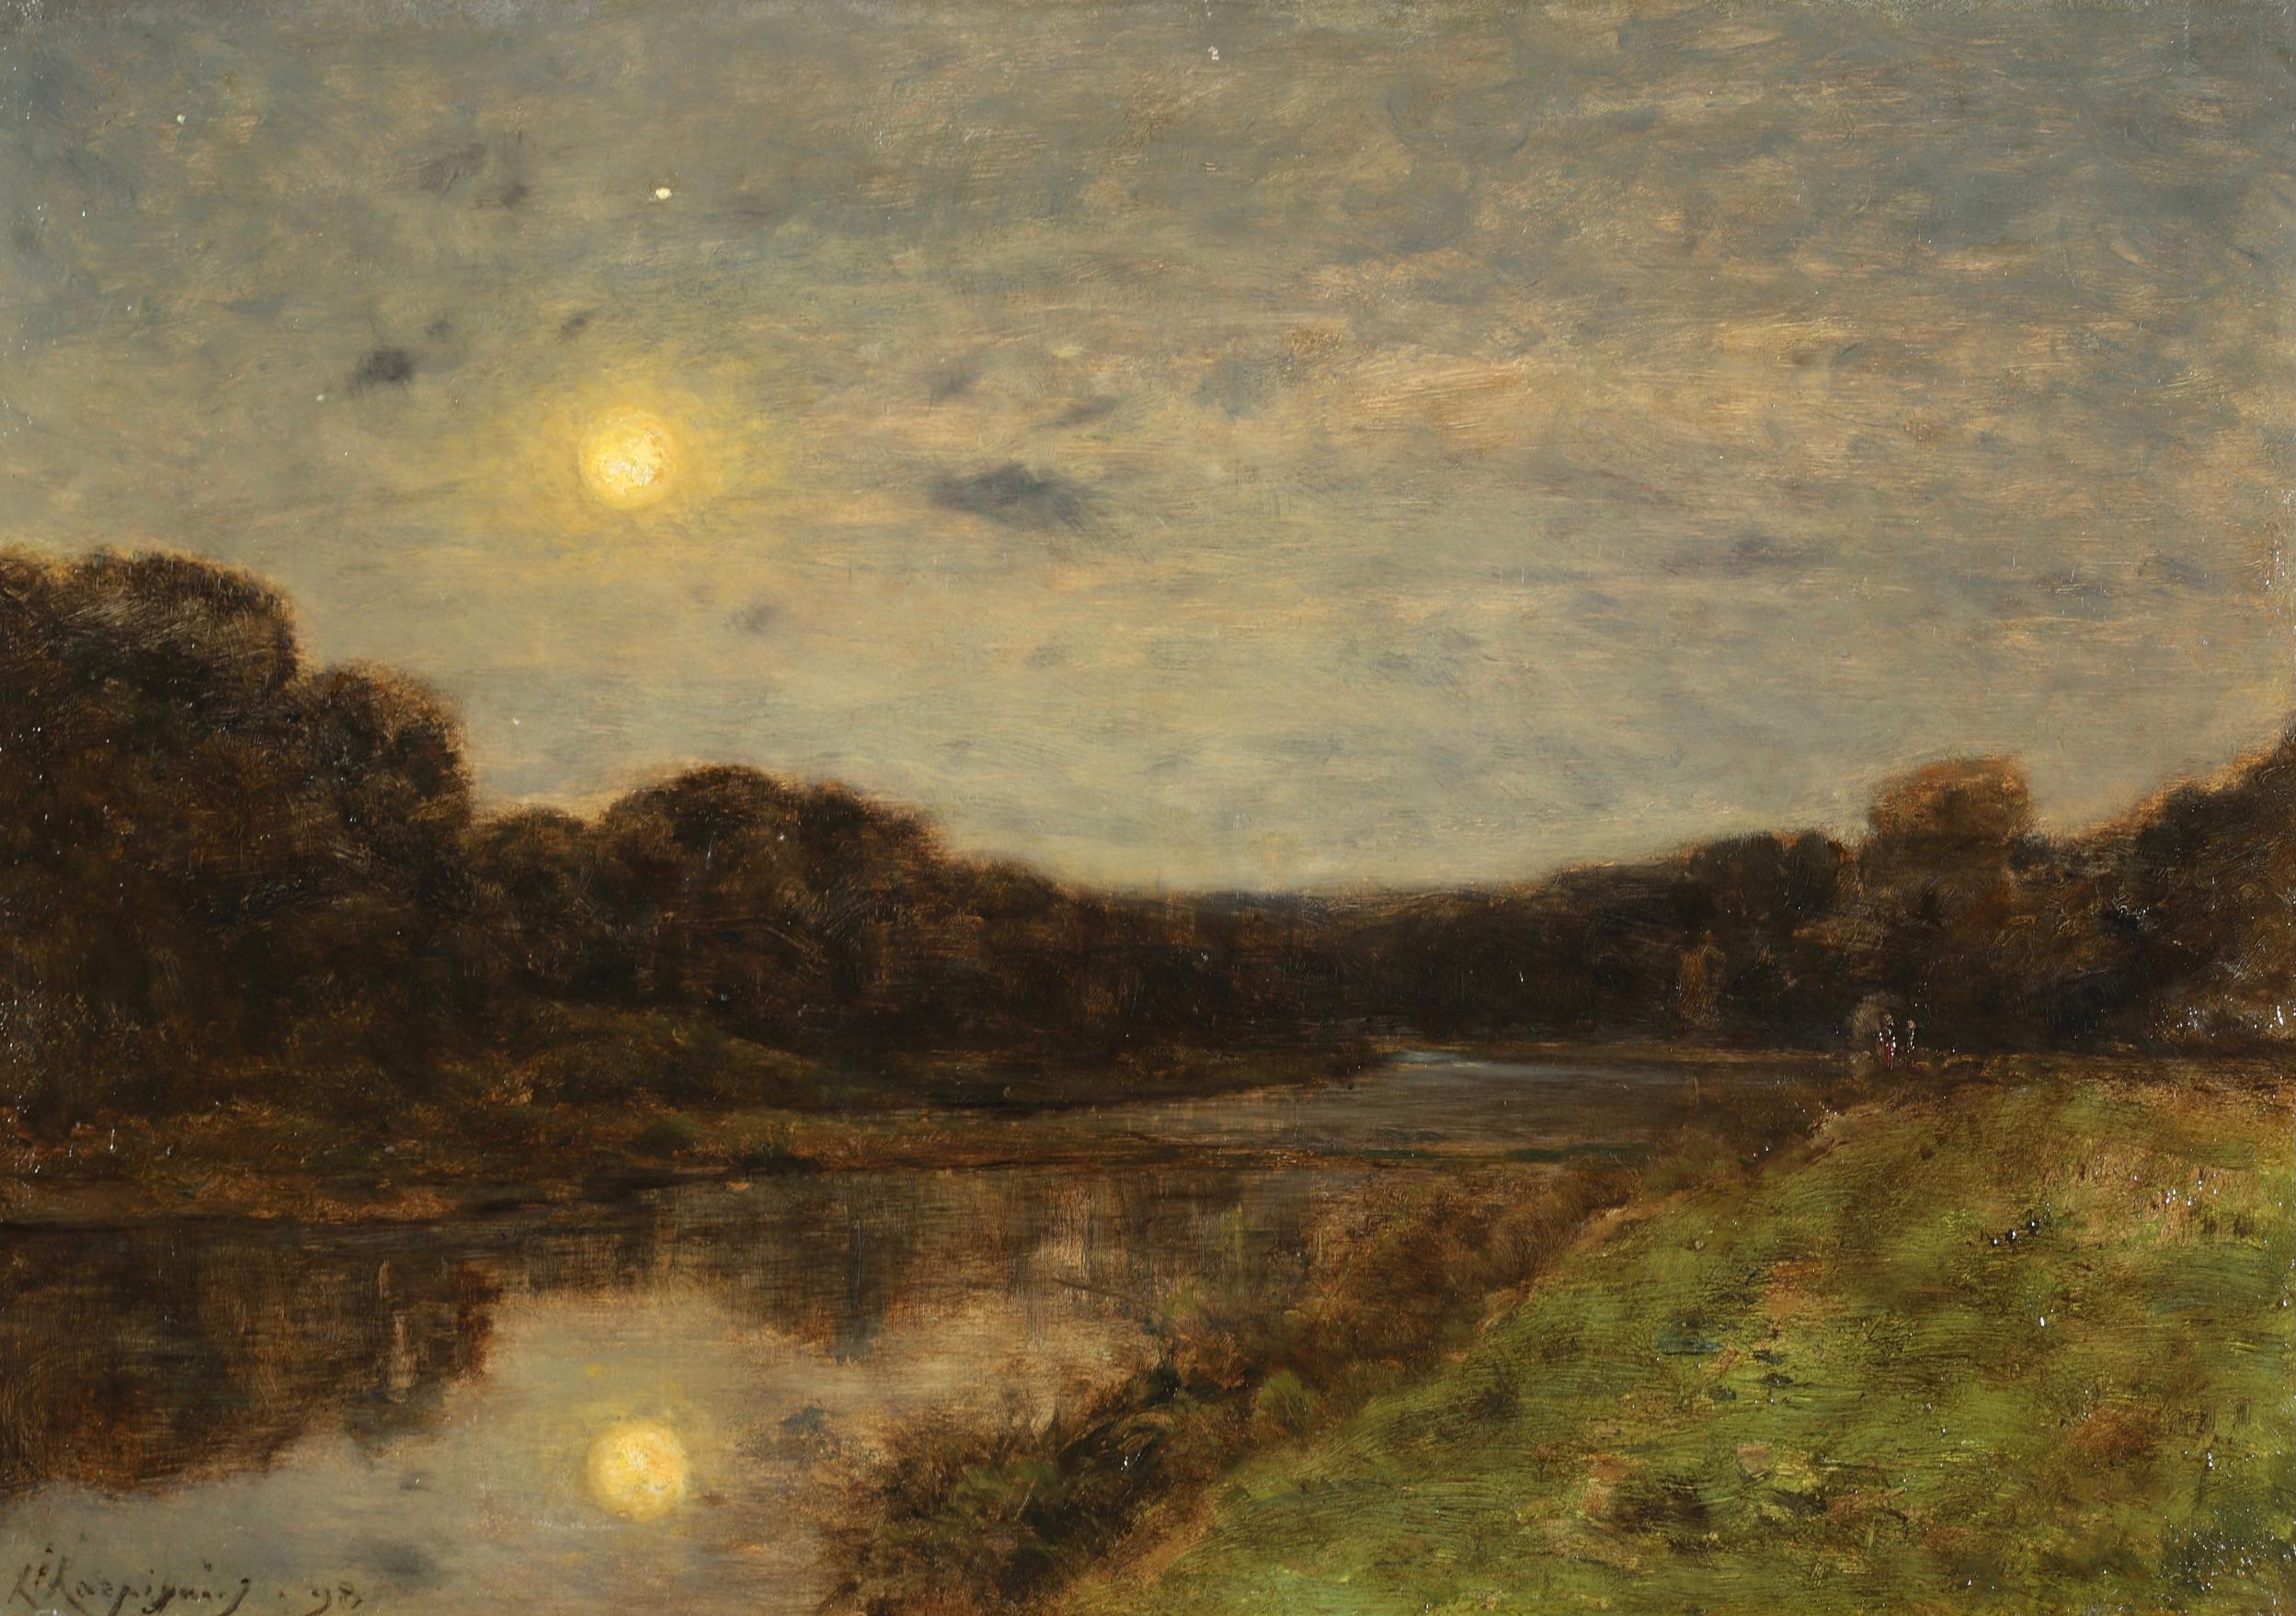 Signed and dated Barbizon School riverscape oil on panel by French painter Henri Joseph Harpignies. The work depicts moonlight reflecting in a still, tree lined river and making the clouds in the sky glow yellow against the dark blue of the sky. A